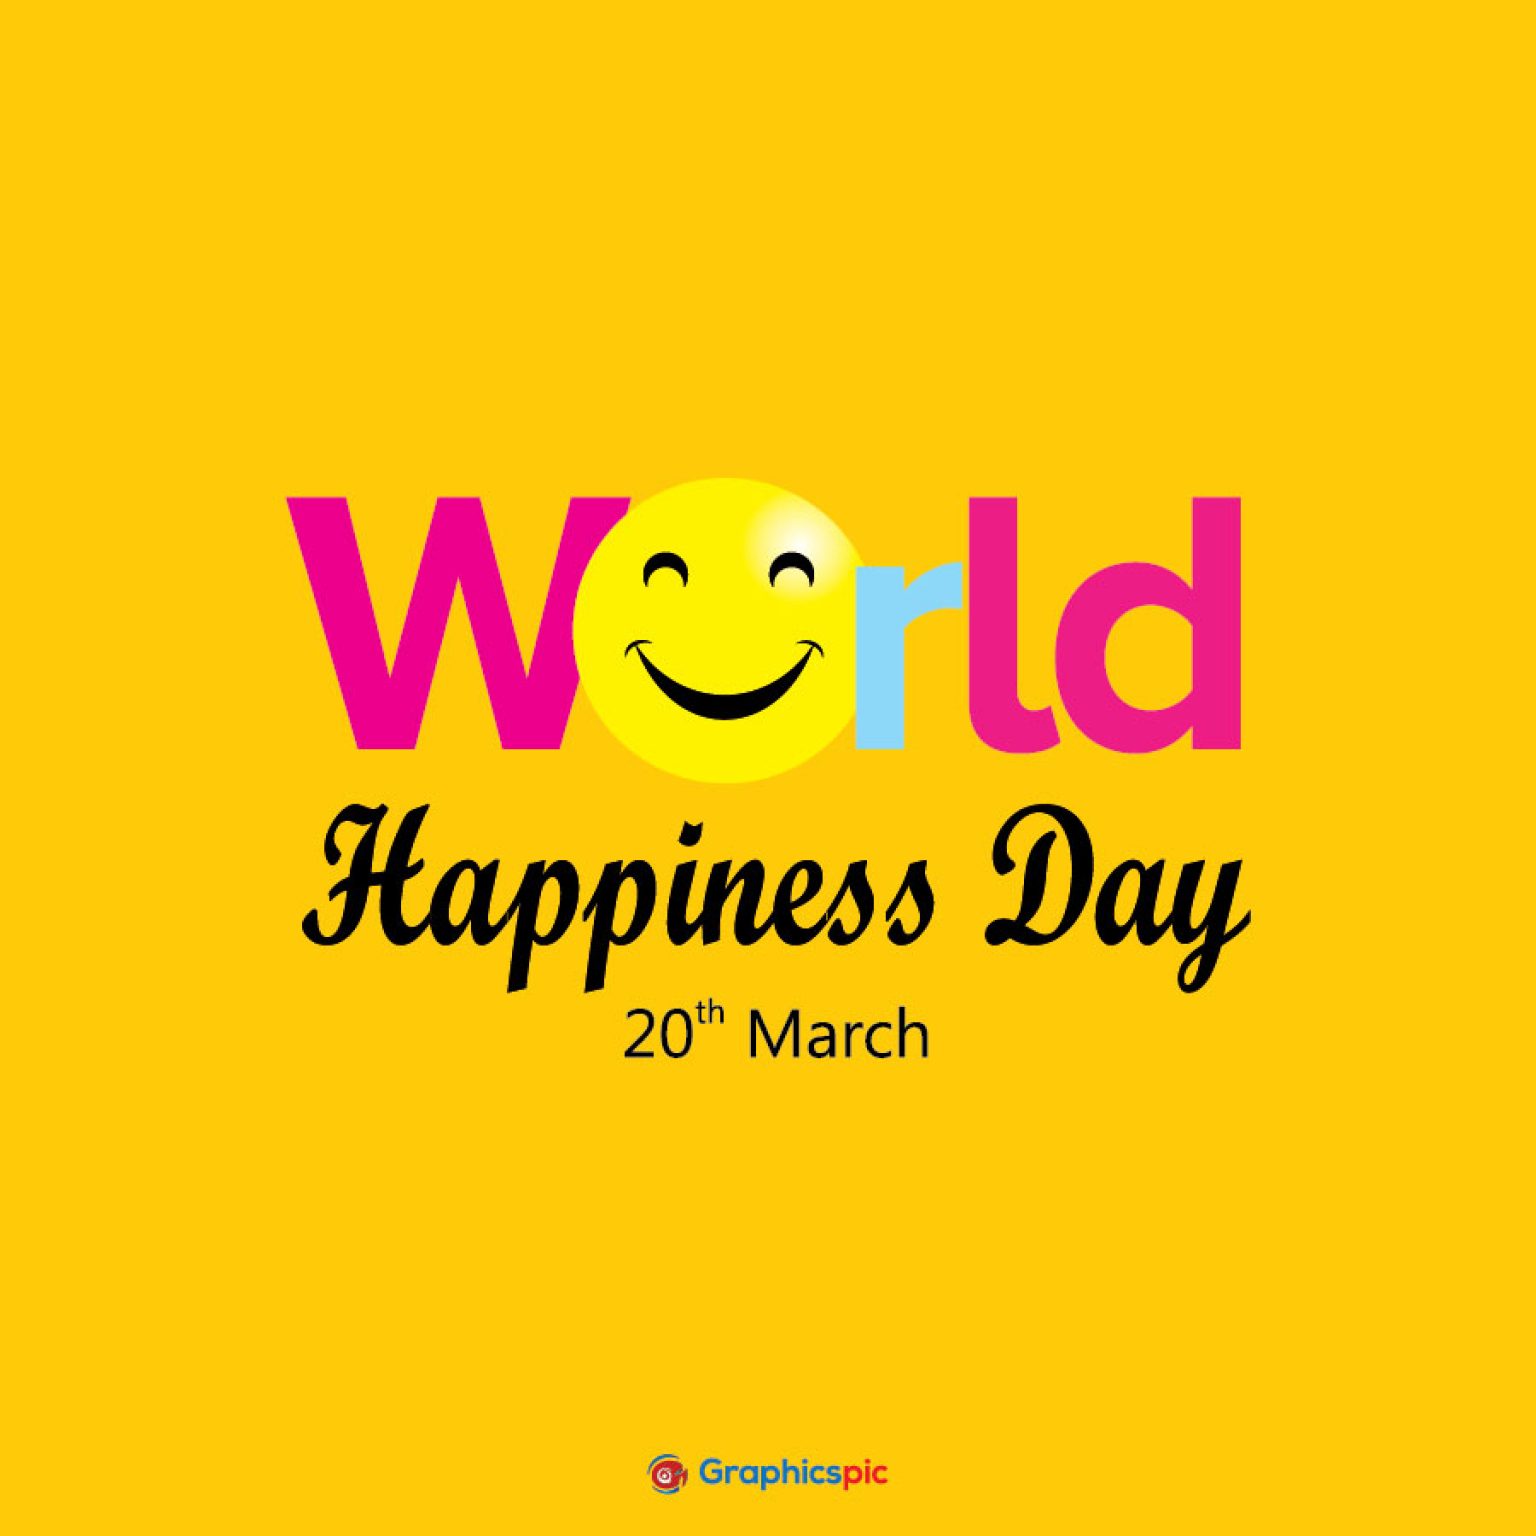 World happiness day, 20th March image free vector Graphics Pic